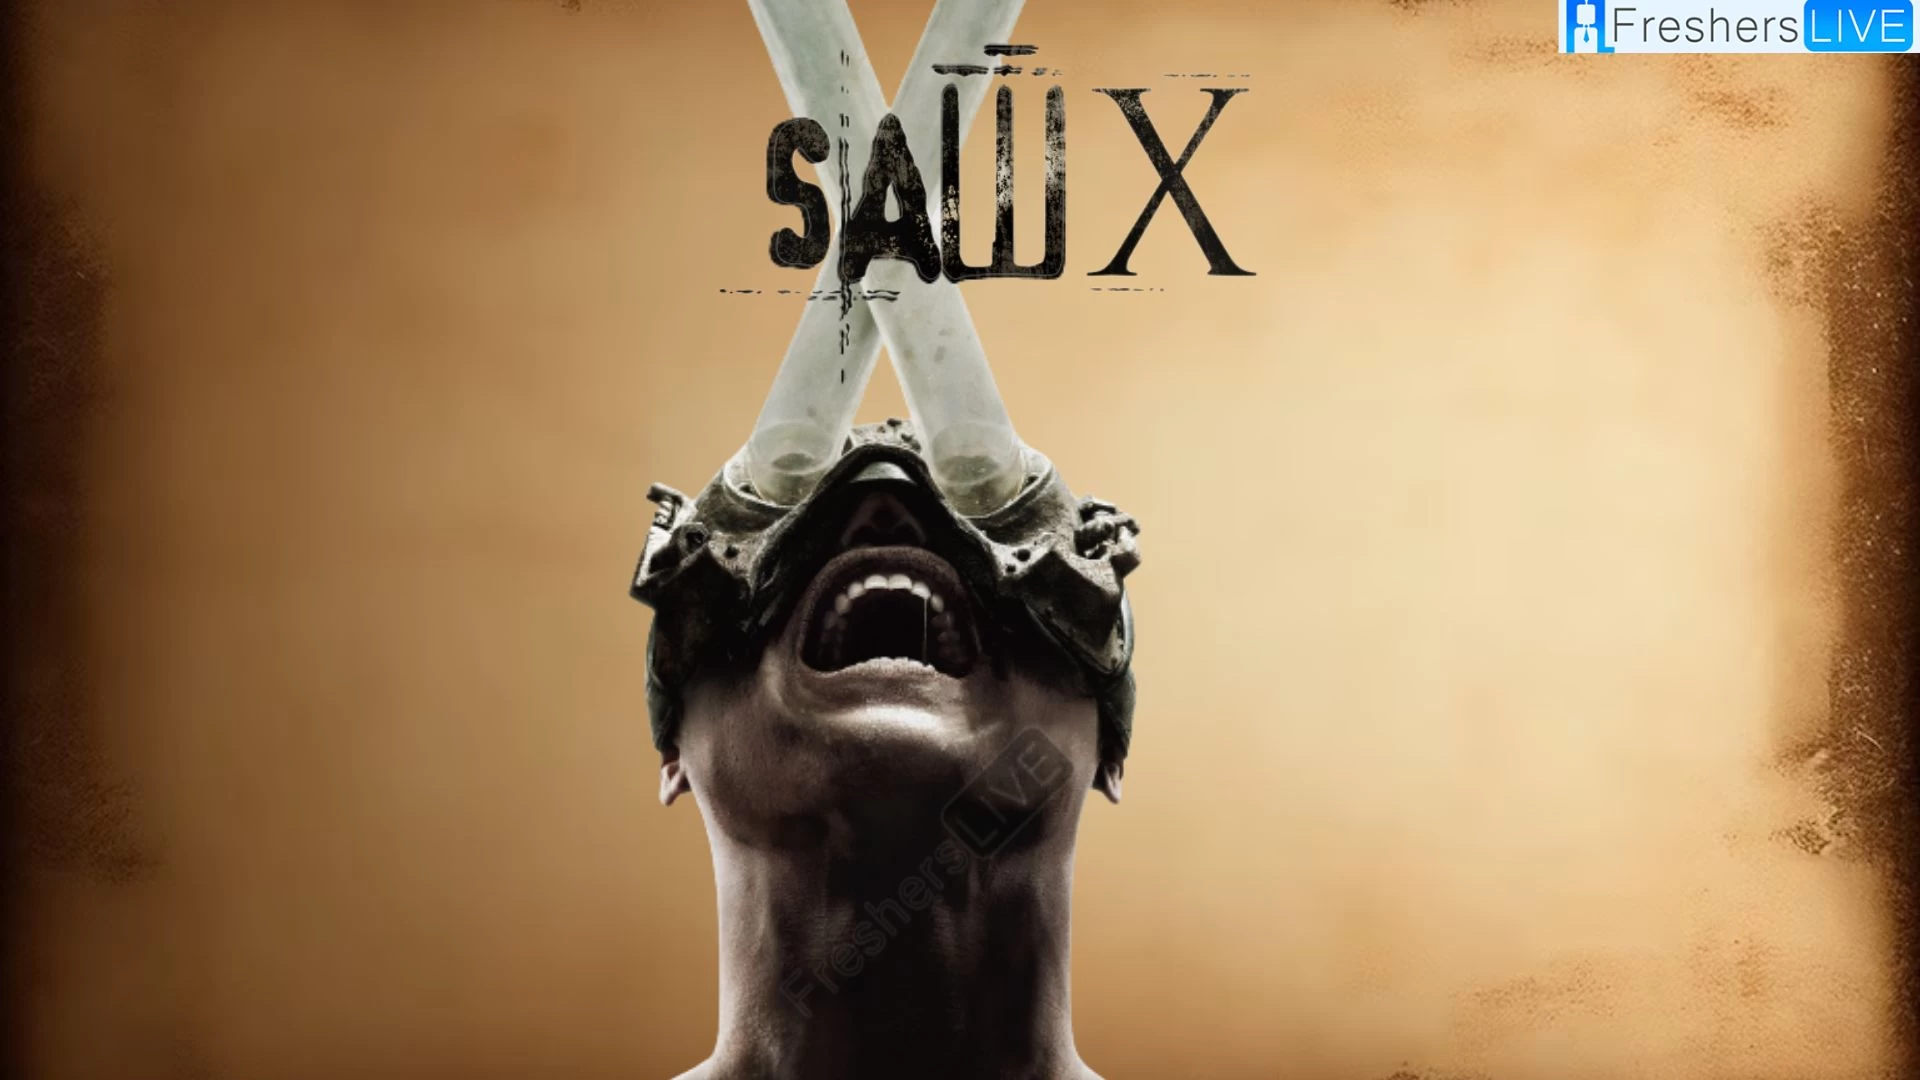 Is Saw X Based On a True Story? Saw X Plot, Cast, Release Date and Trailer